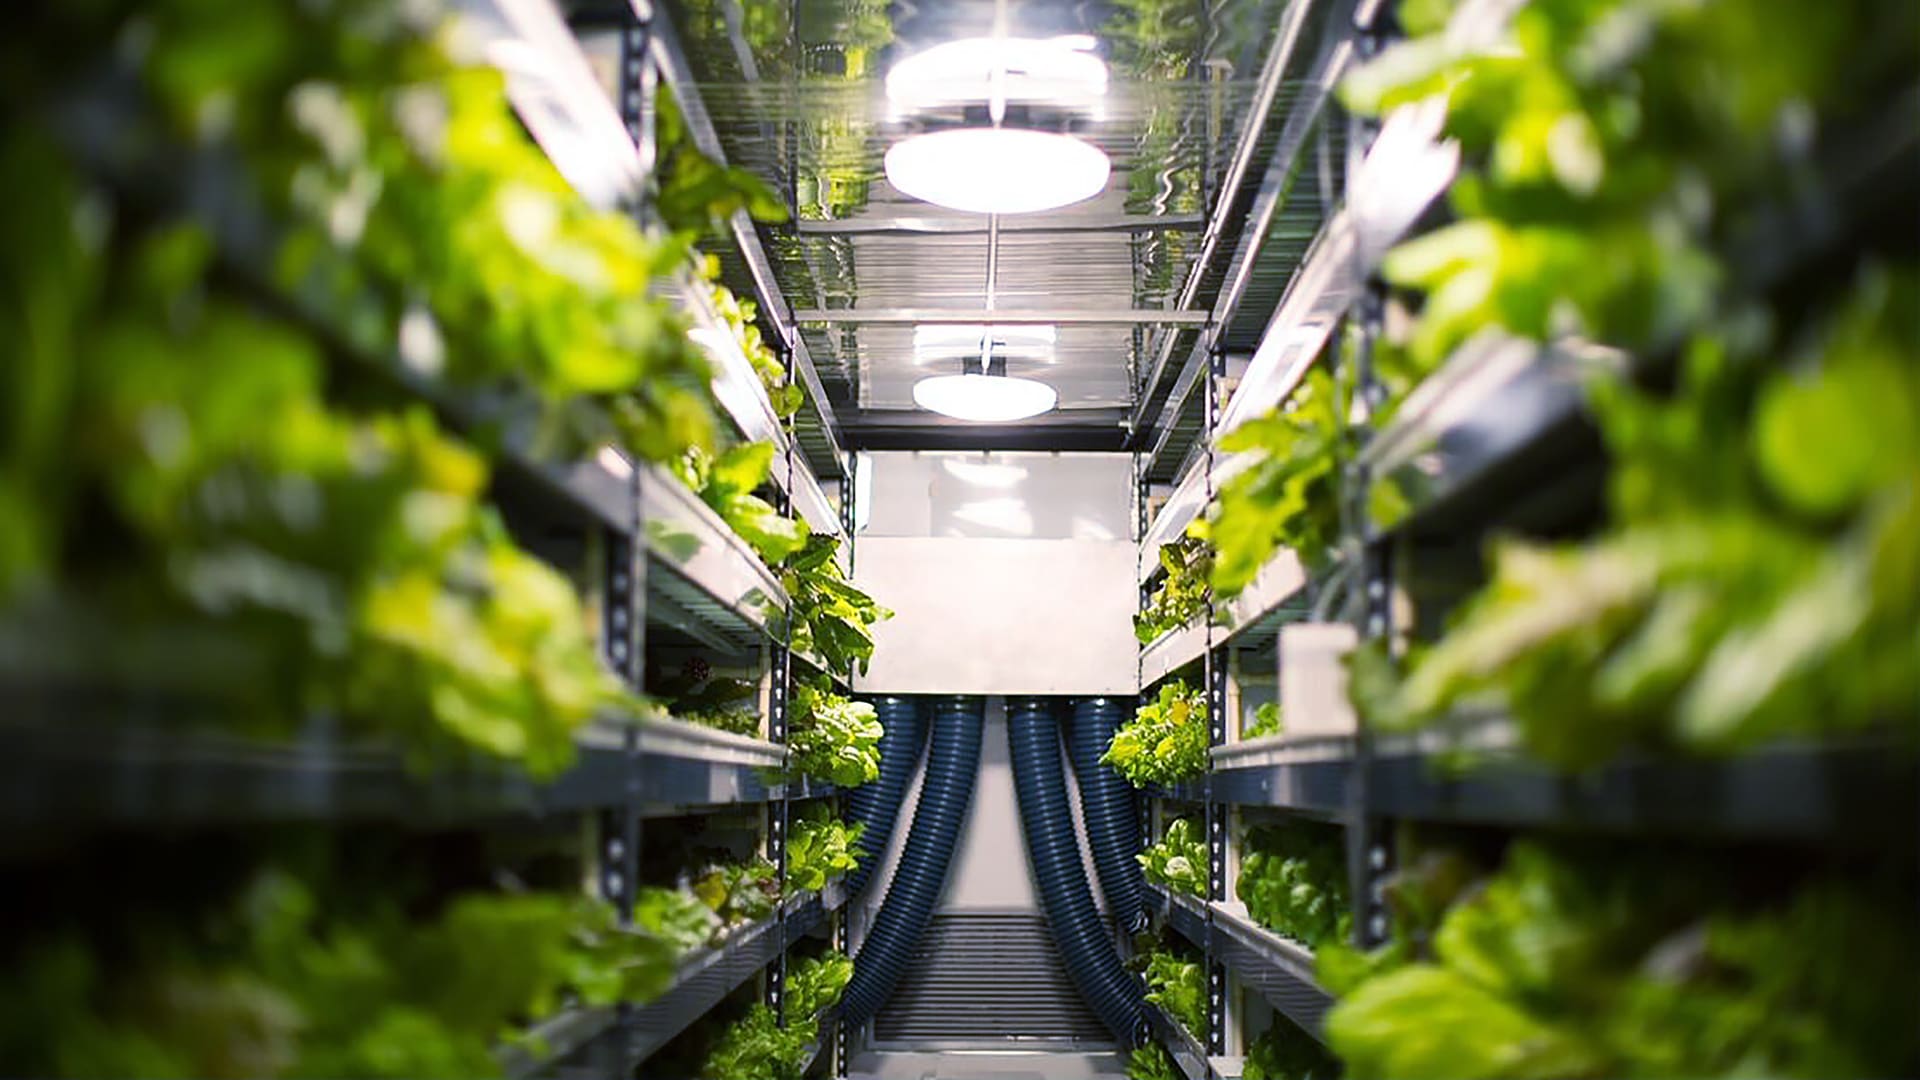 This Vertical Farm Wants To Be An Agriculture Company, Not A Tech Company